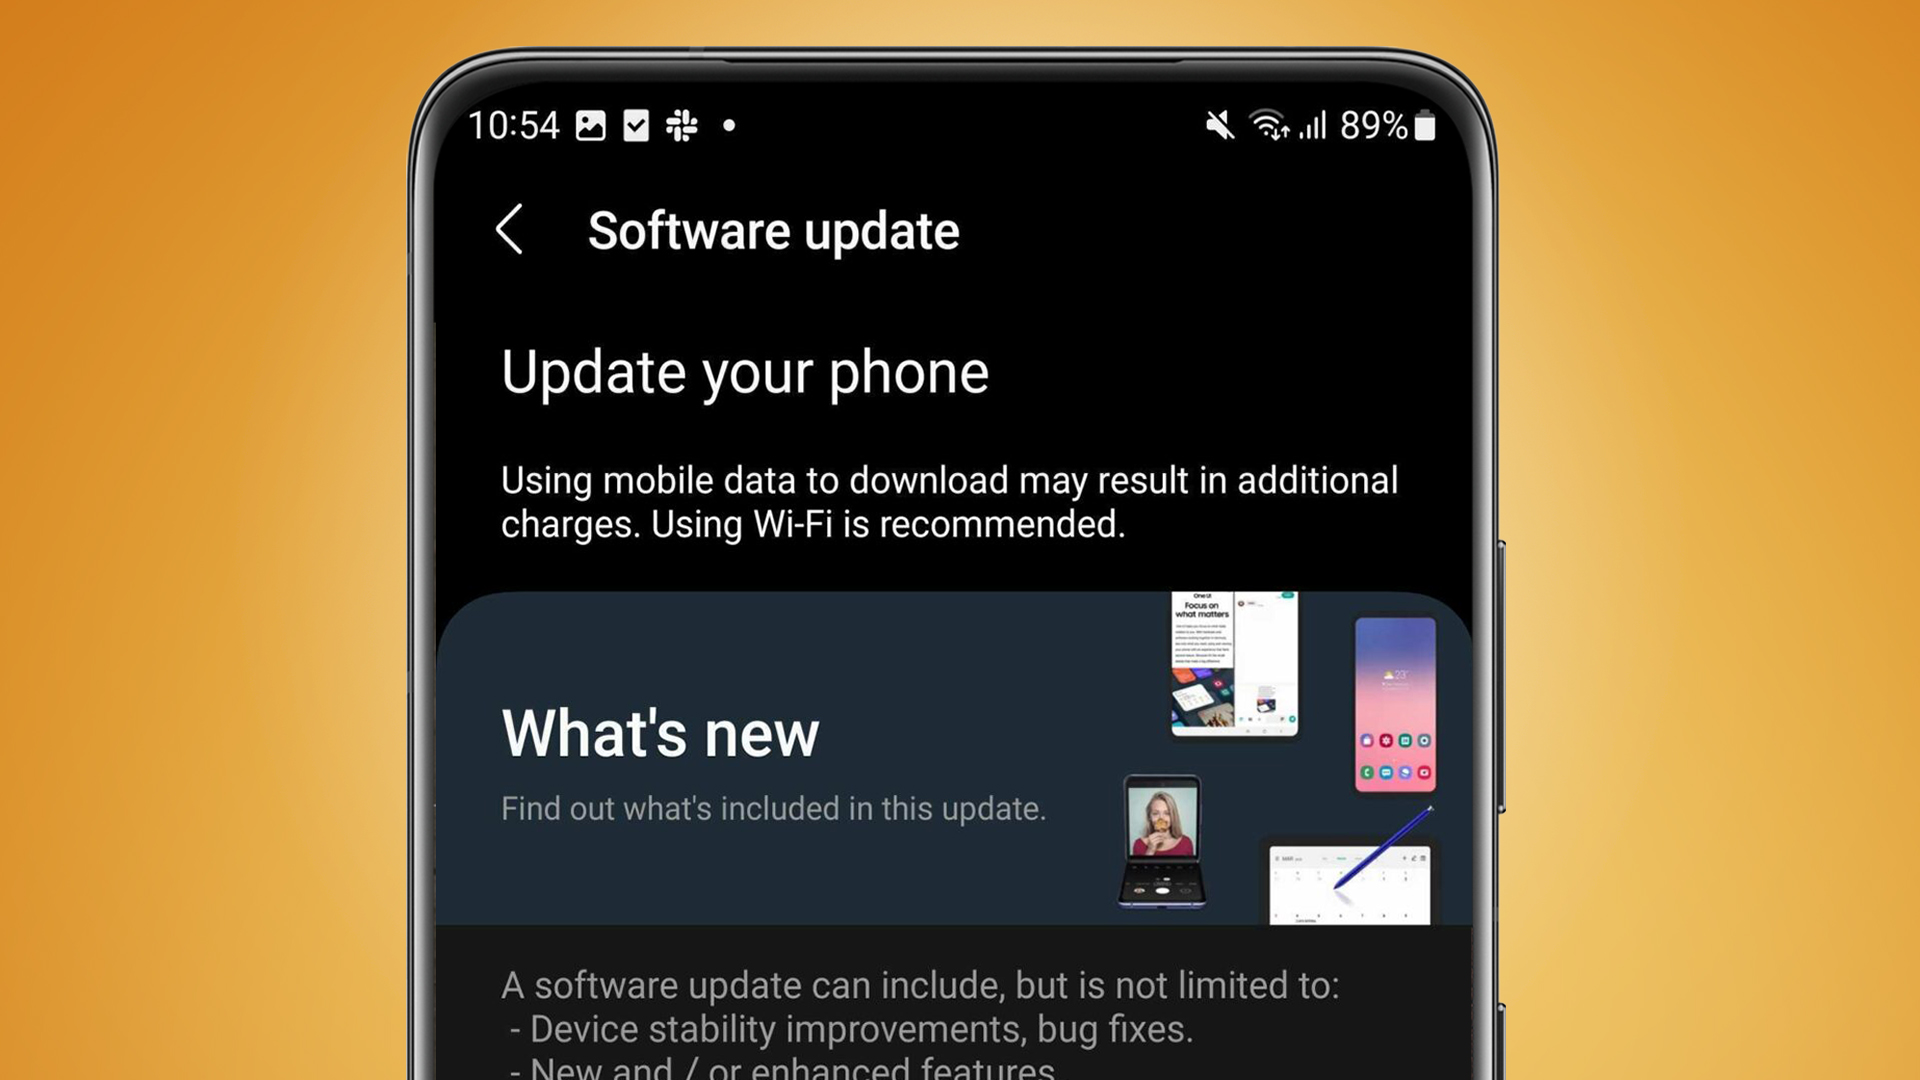 A Samsung phone on an orange background showing a software update being installed